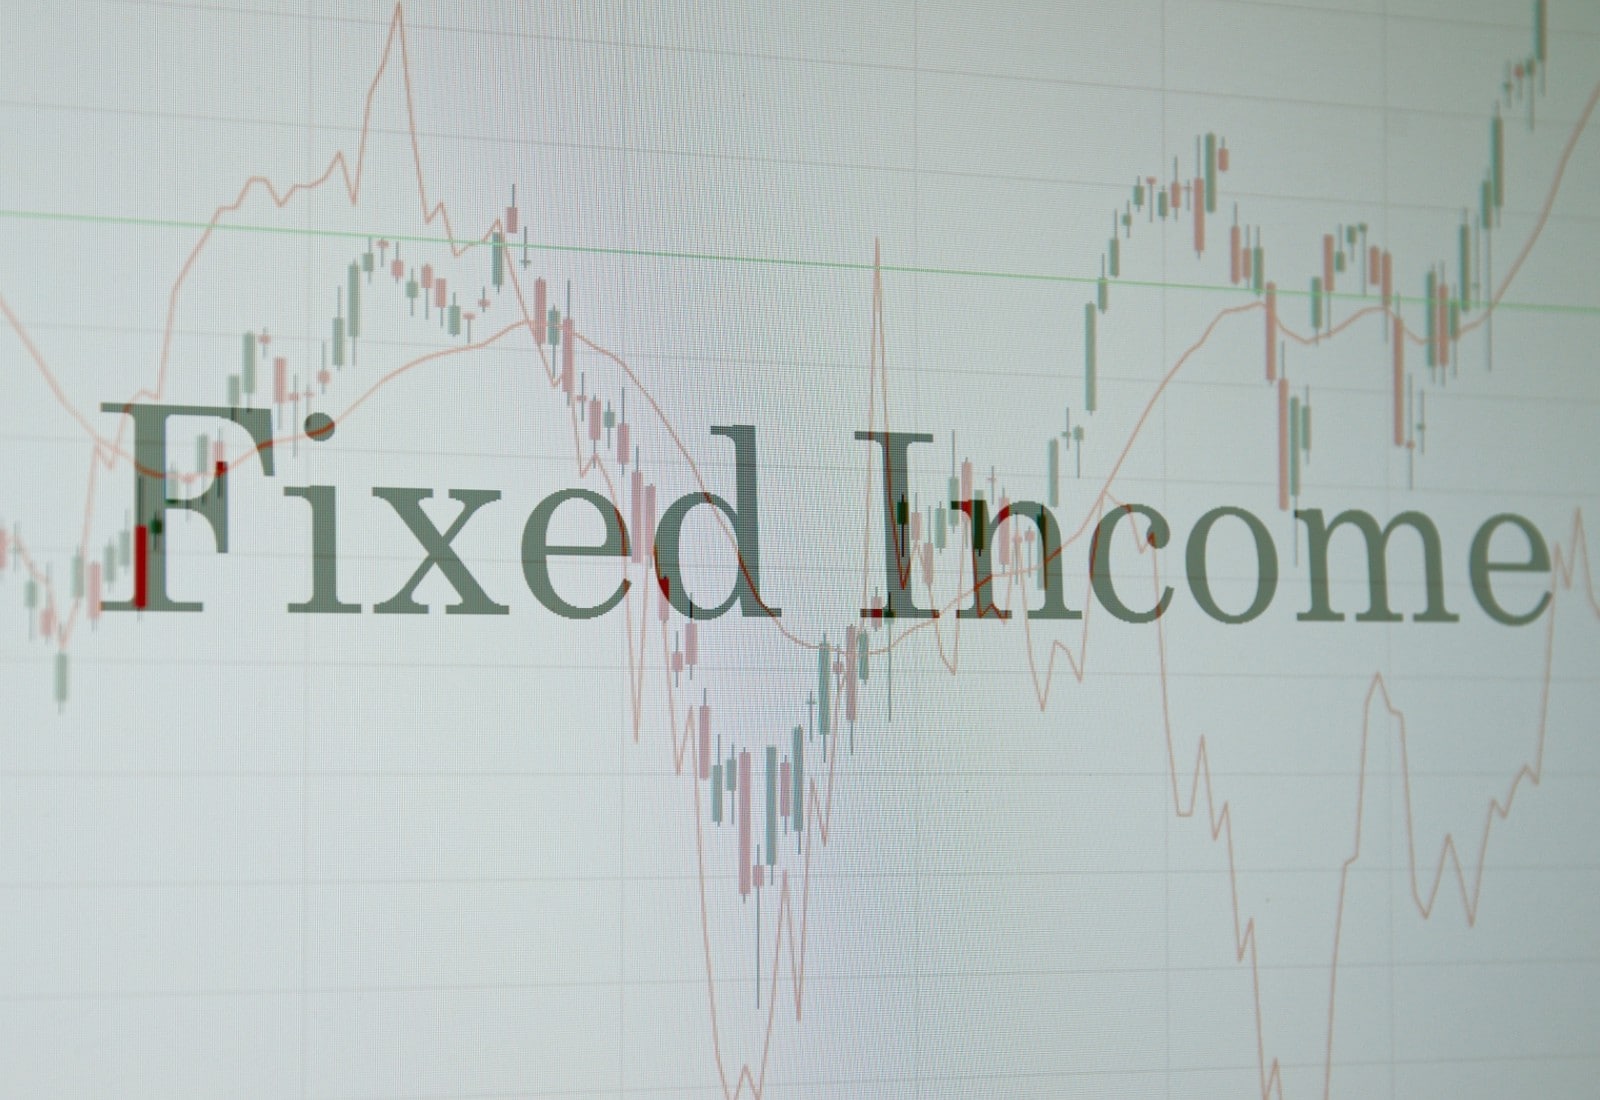 Link Financial Advisory - Understanding Fixed-Income Las Vegas